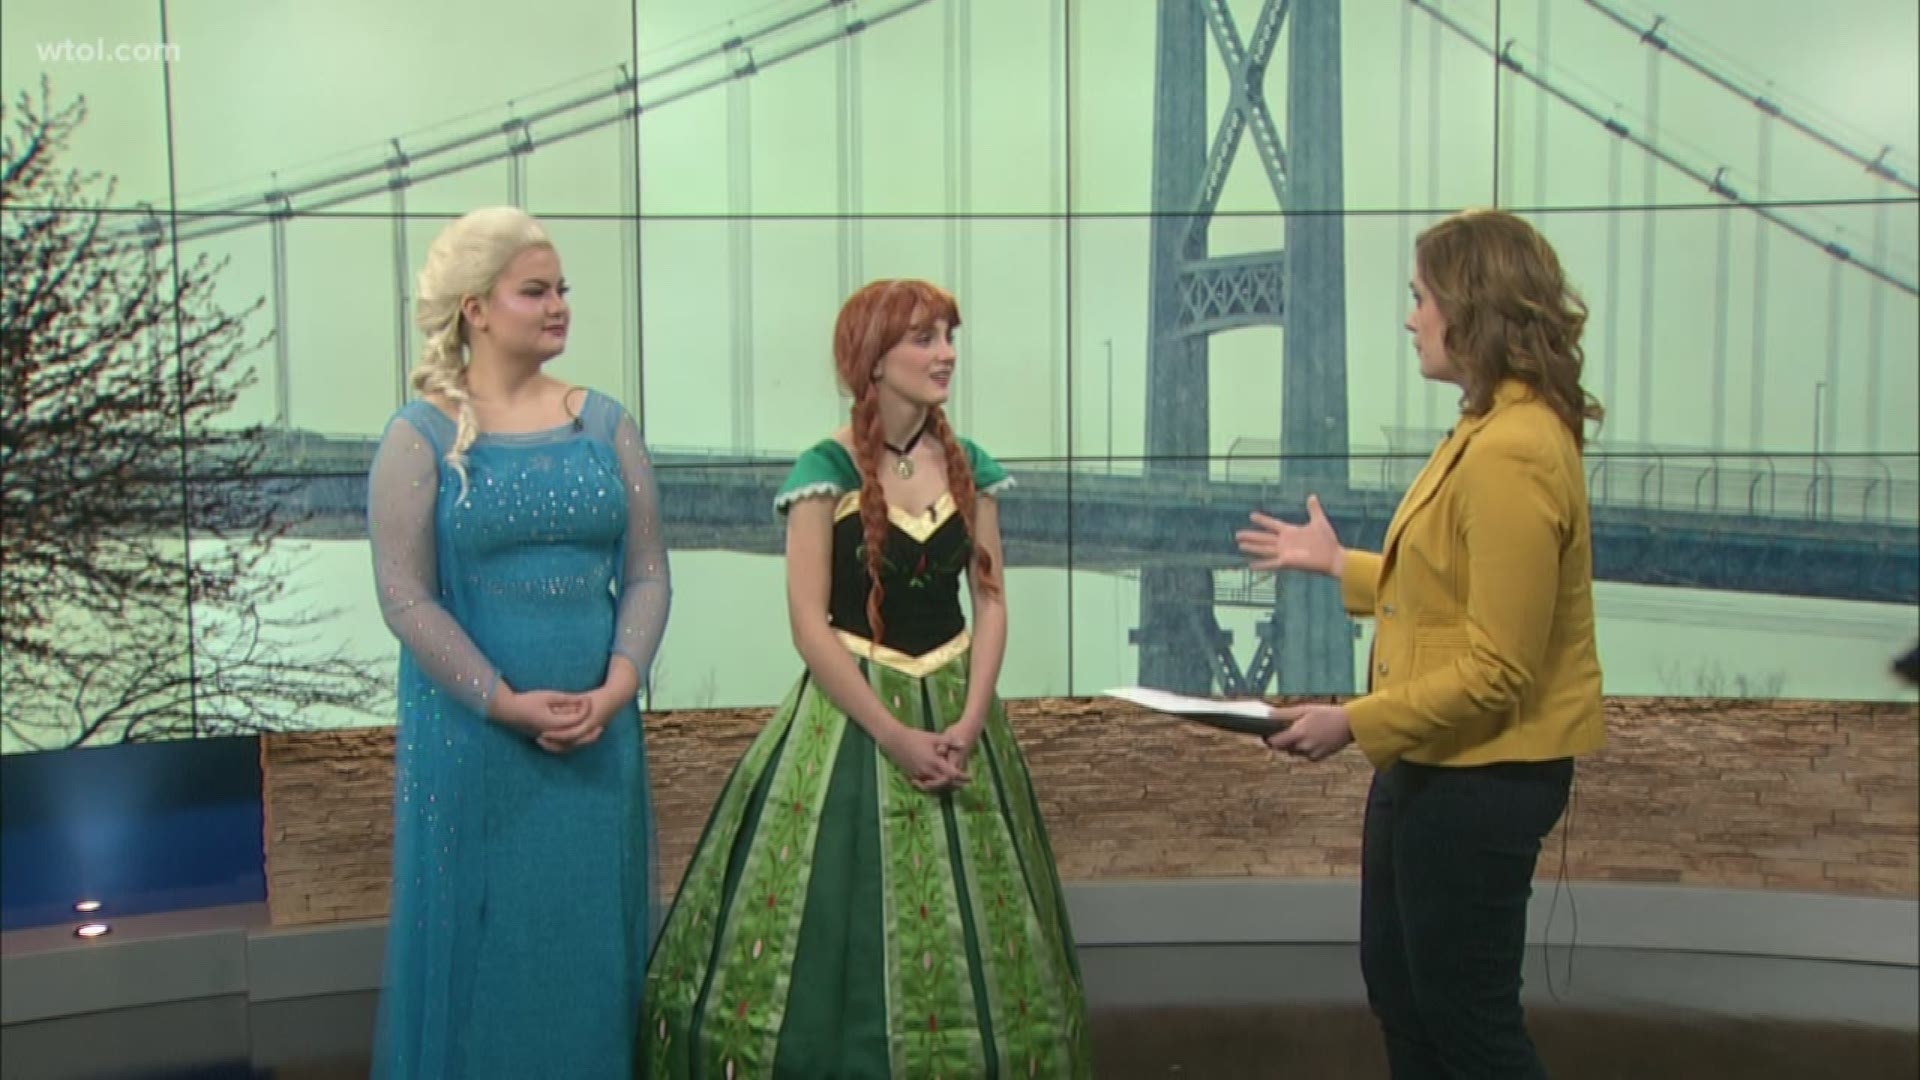 This weekend and next weekend, you can catch Elsa, Anna and the gang in Michigan with Frozen Jr. at the Croswell!